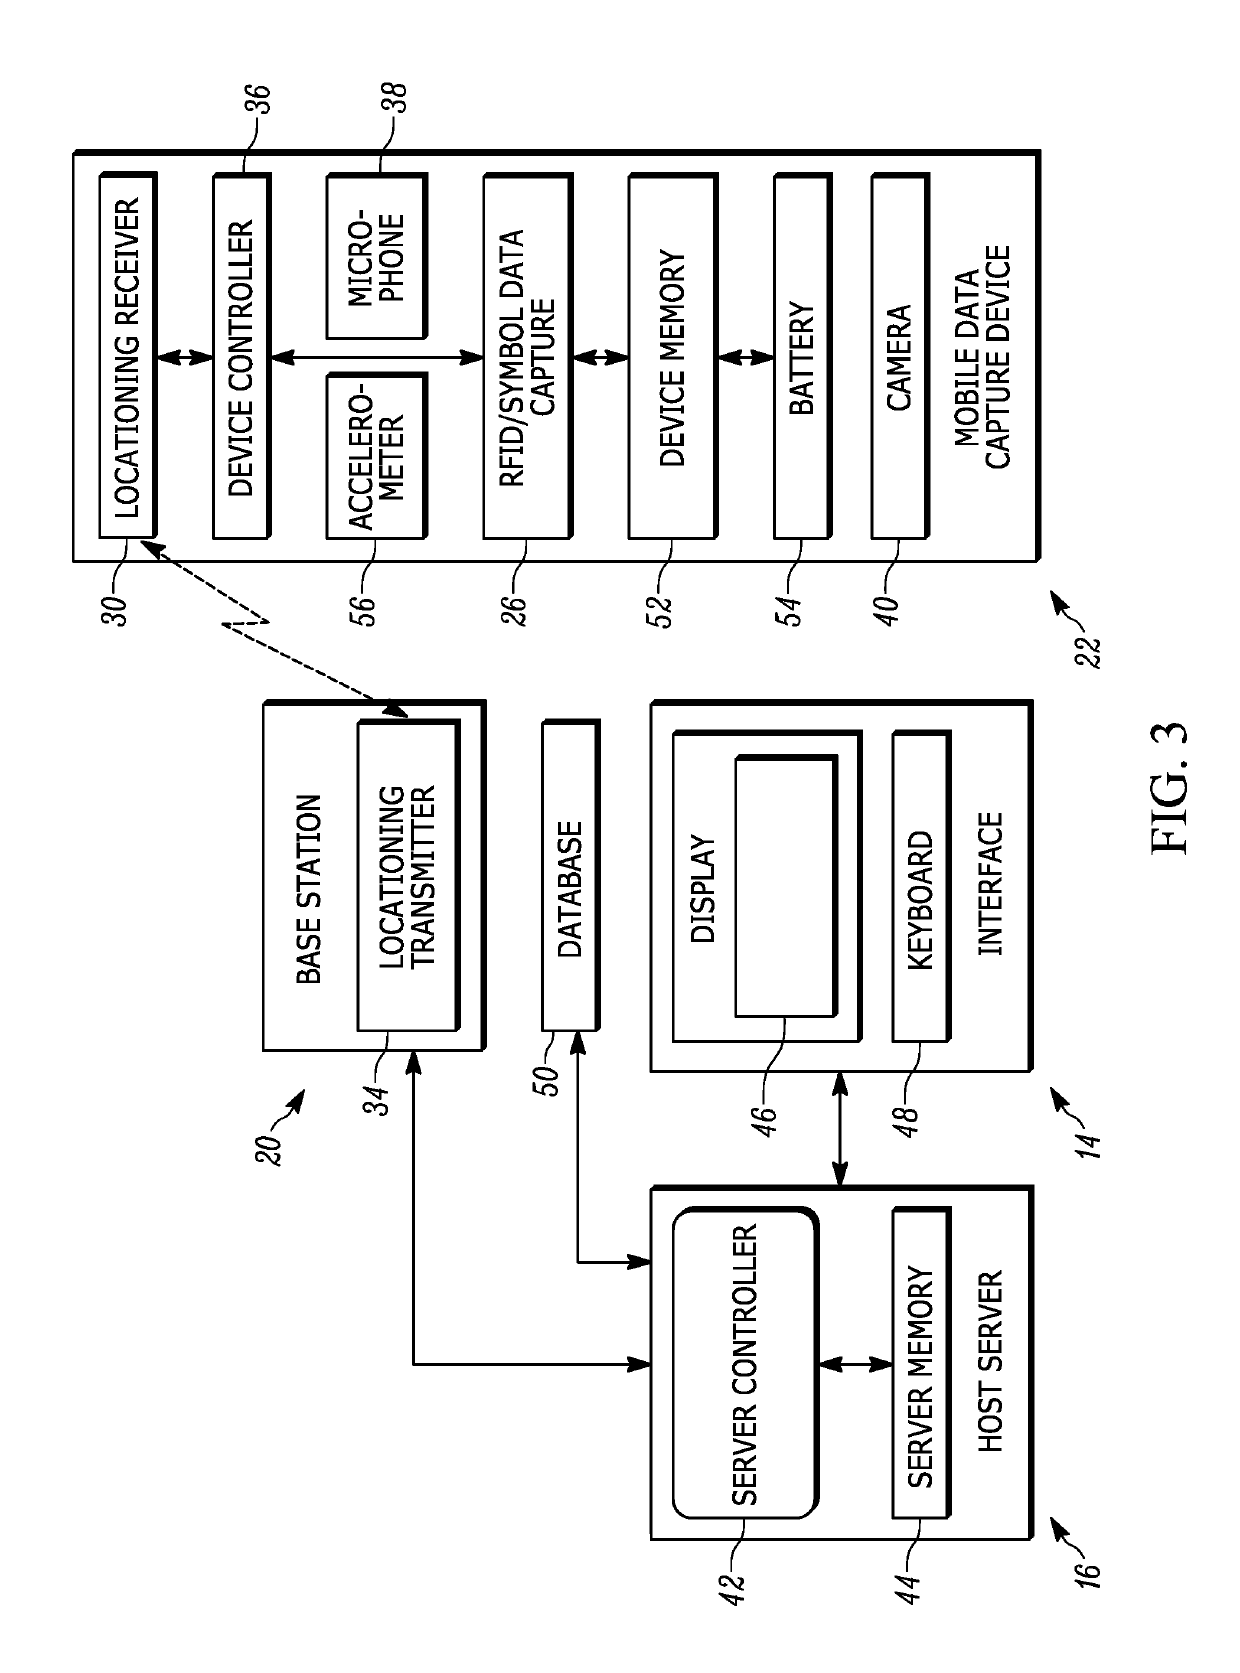 Arrangement for, and method of, analyzing wireless local area network (WLAN) field coverage in a venue